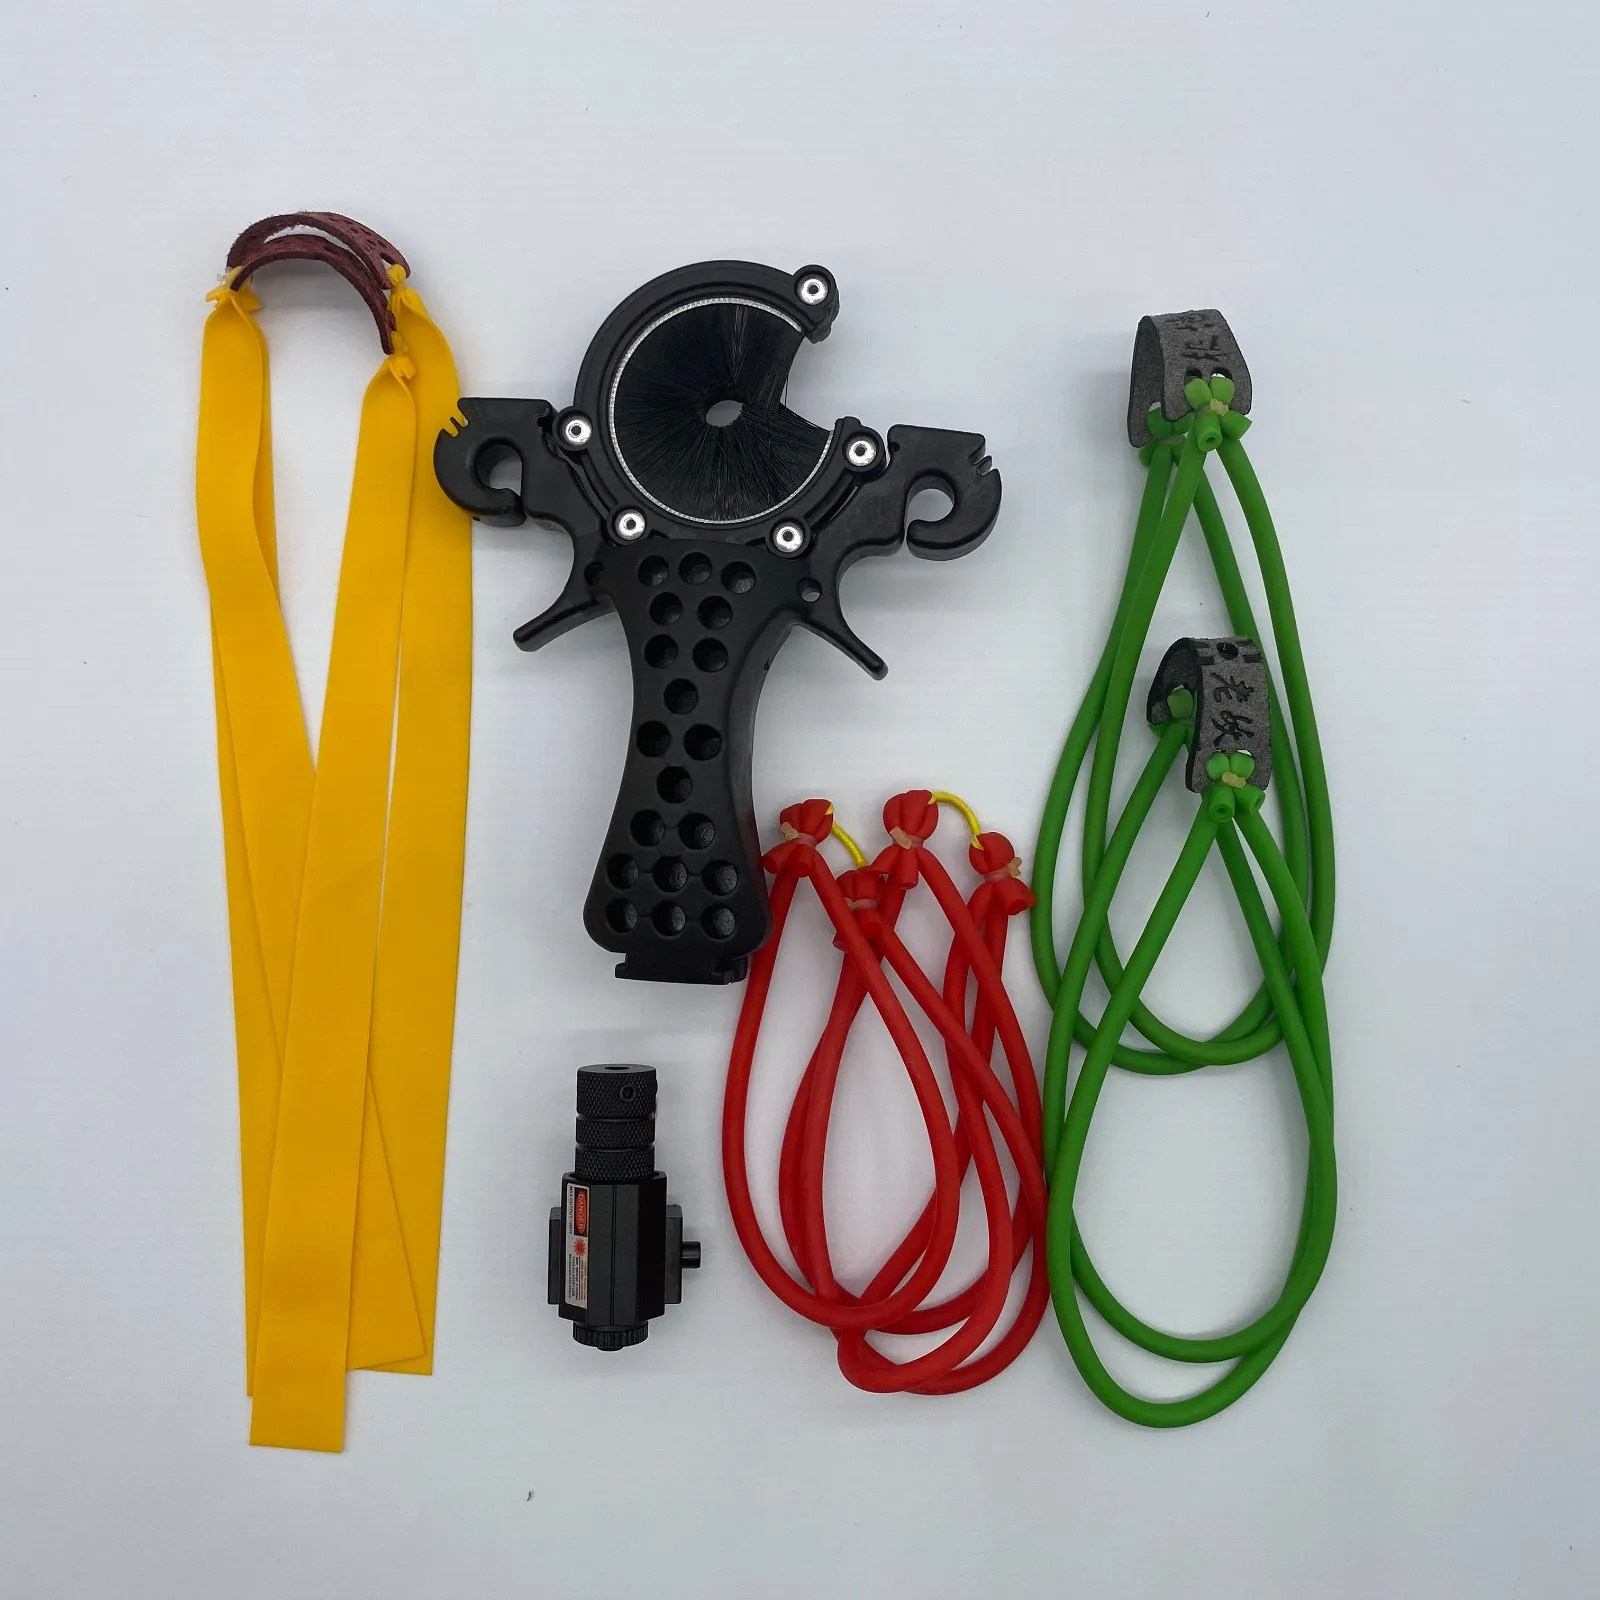 

Outdoor Fishing Sports Fish Hunting DIY Slingshot Catapult Wristband Hand Guard Rubber Band Reel Sling Shot with Arrow Darts